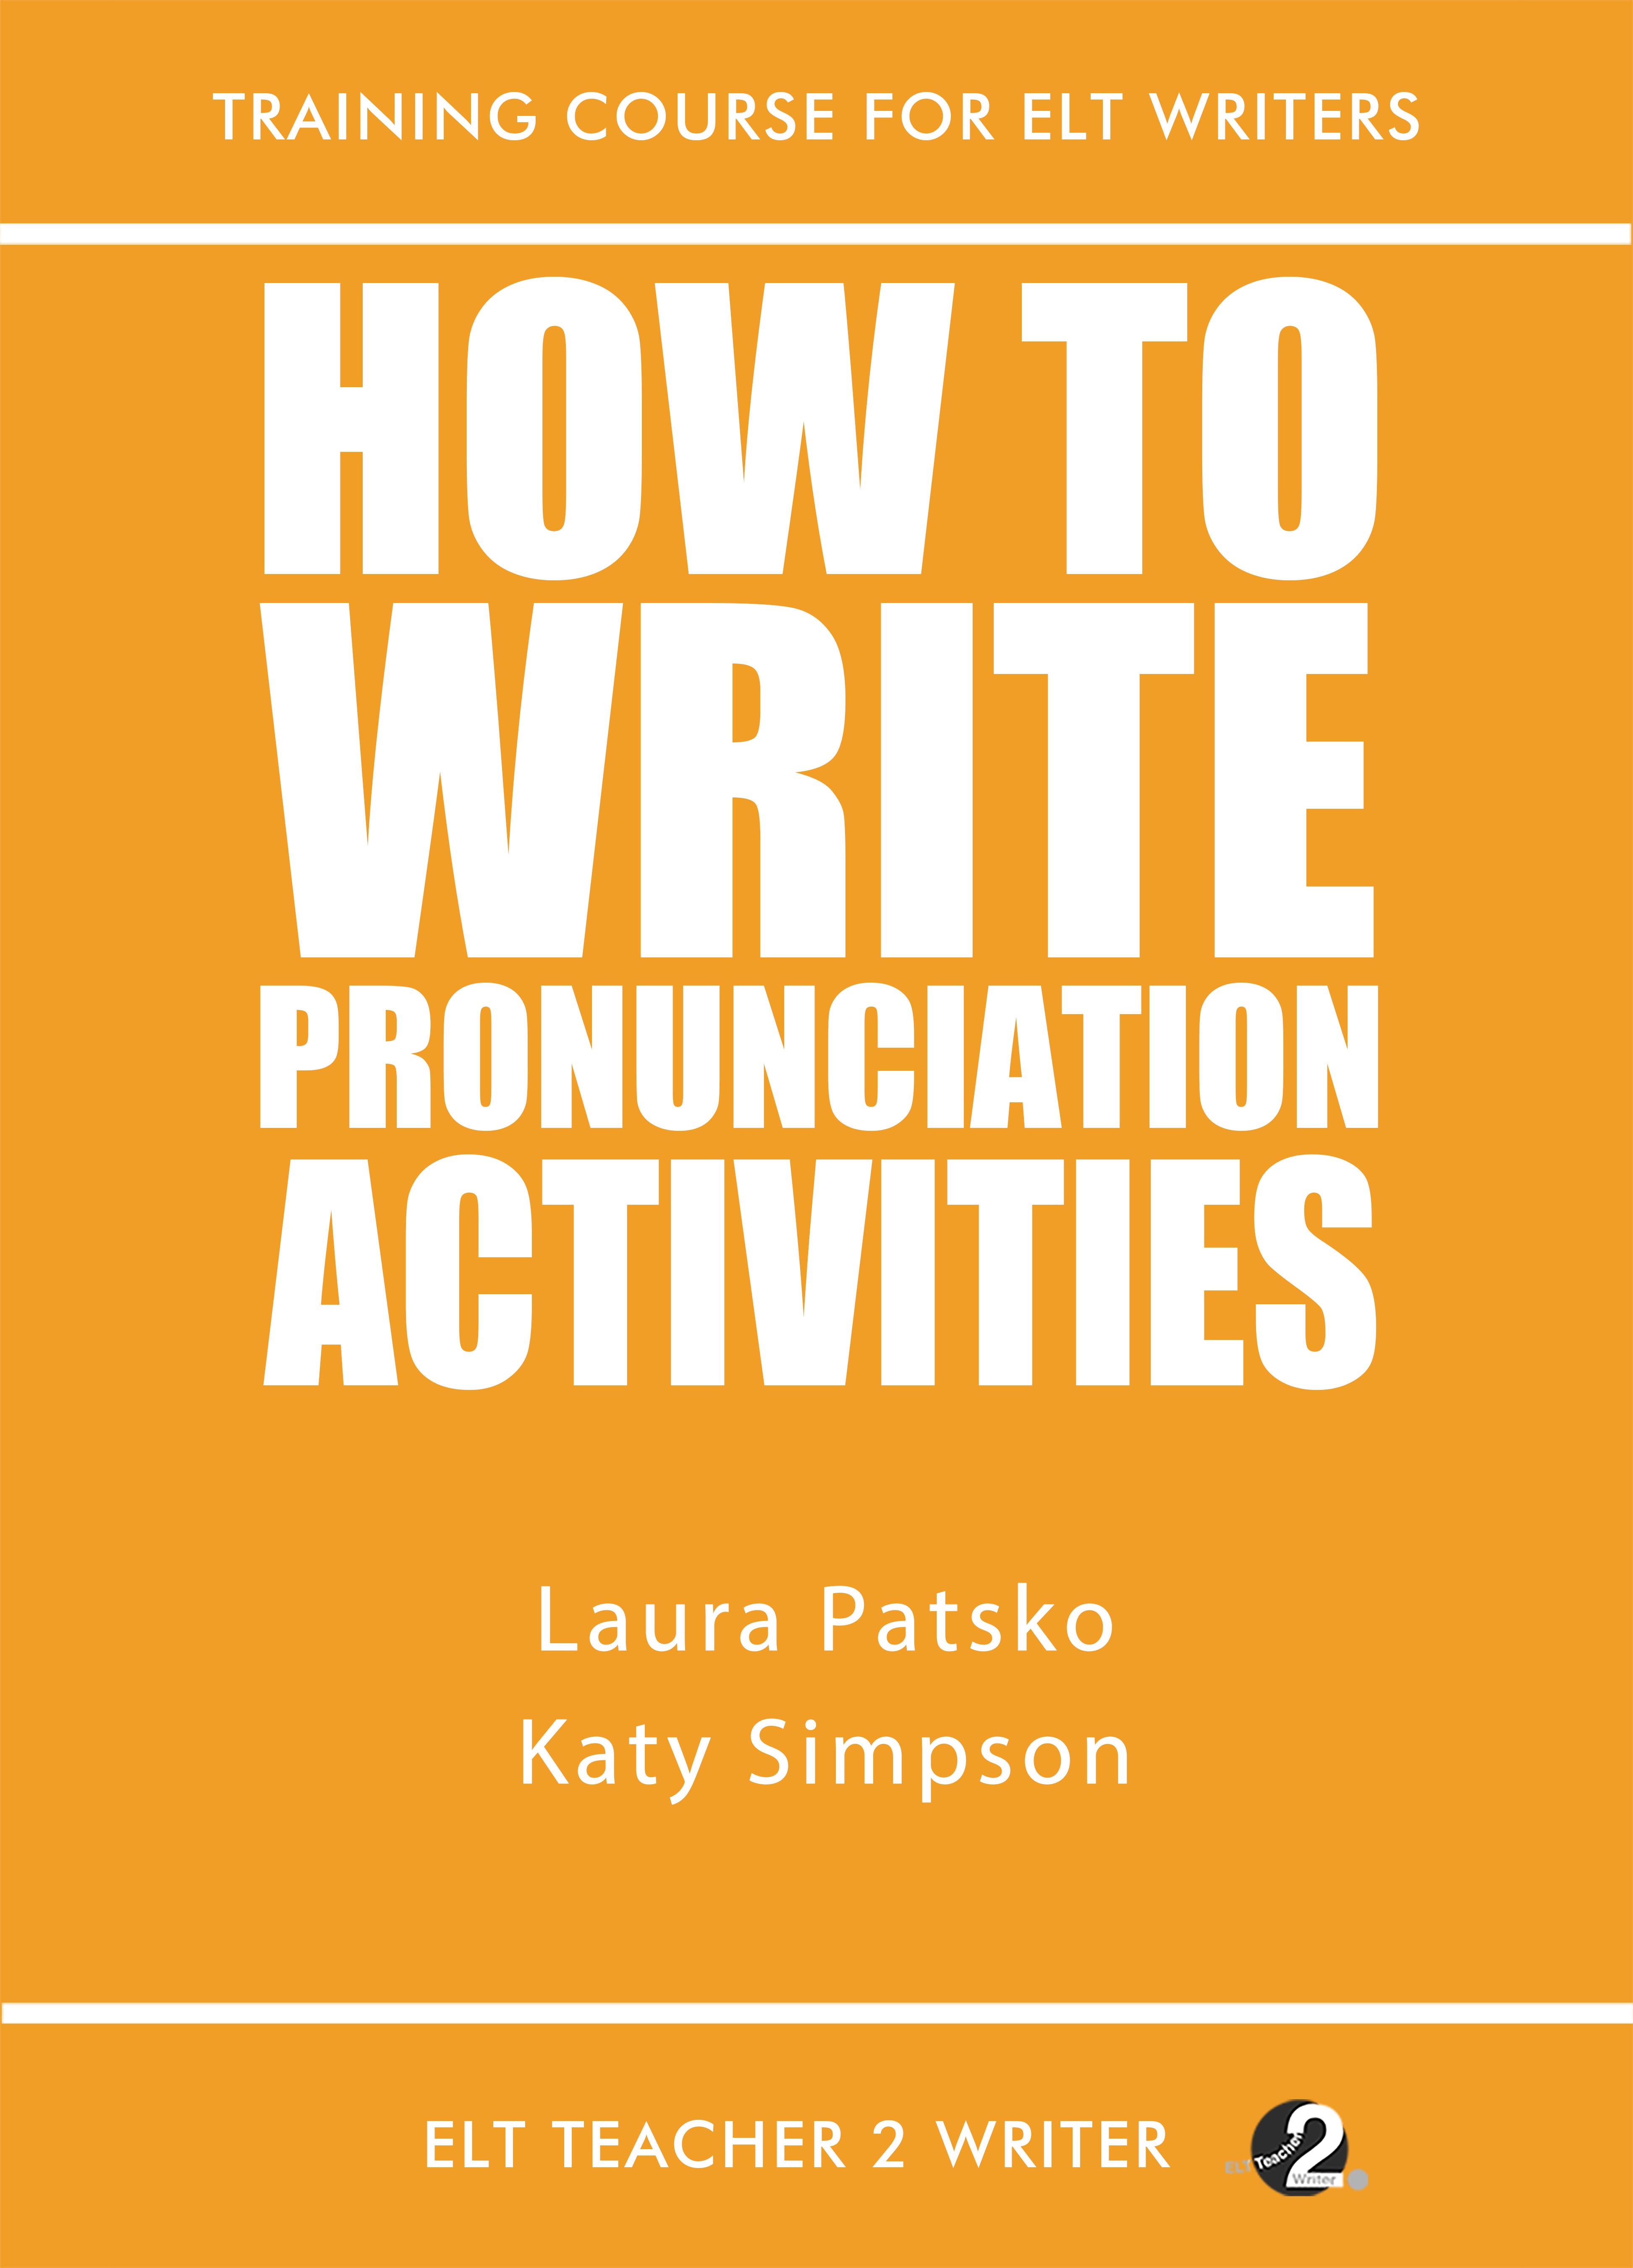 Our new pronunciation book!